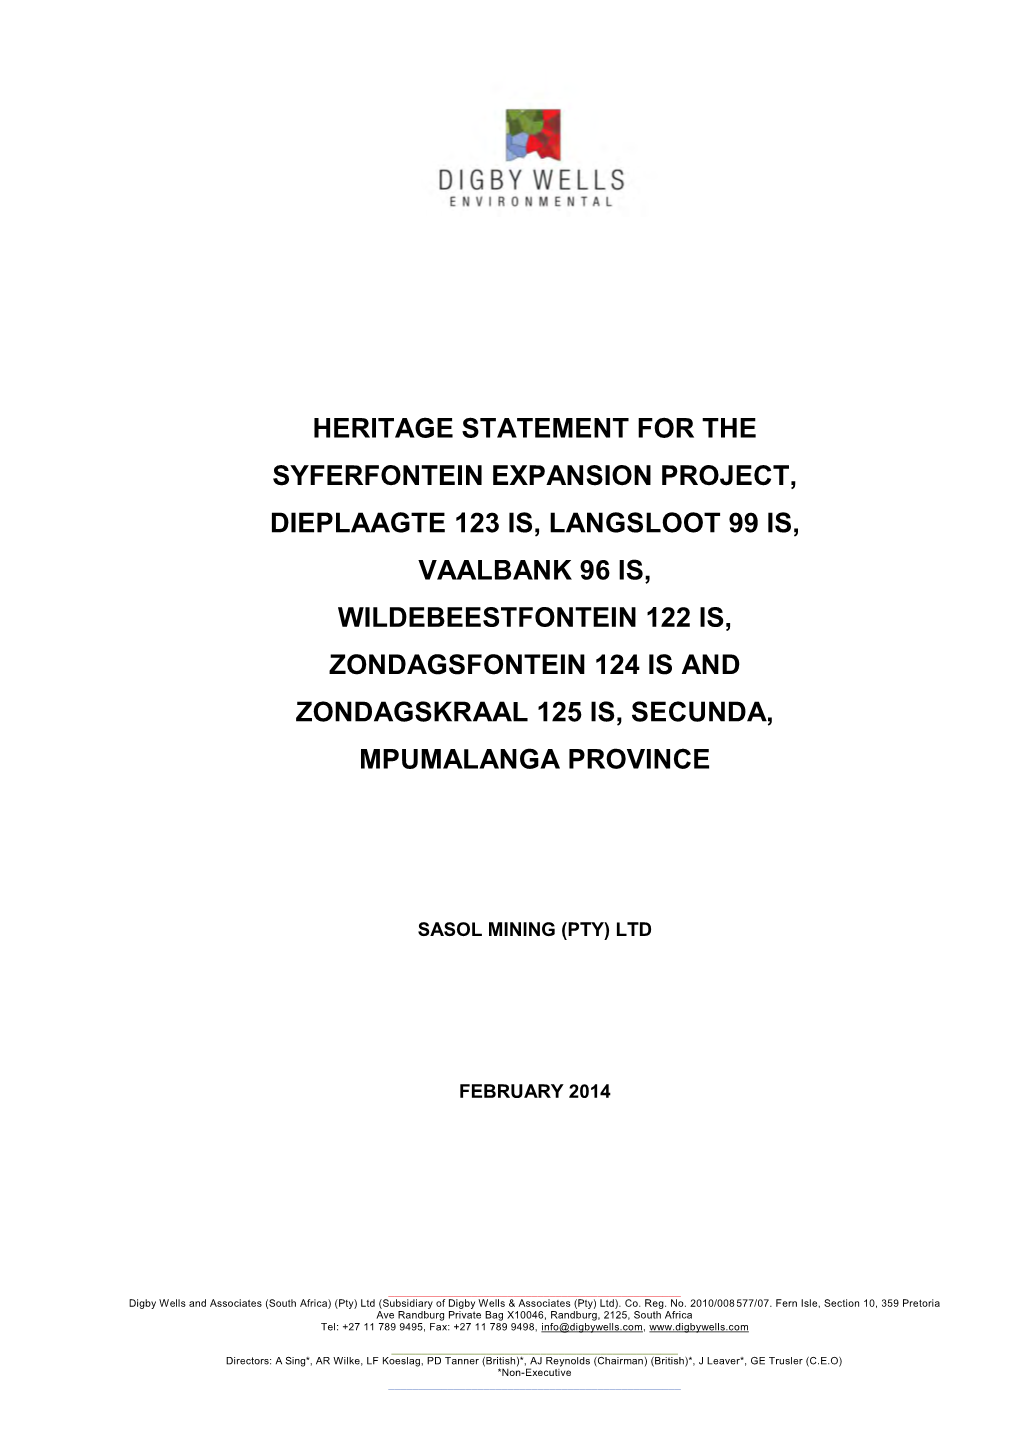 Heritage Statement for the Syferfontein